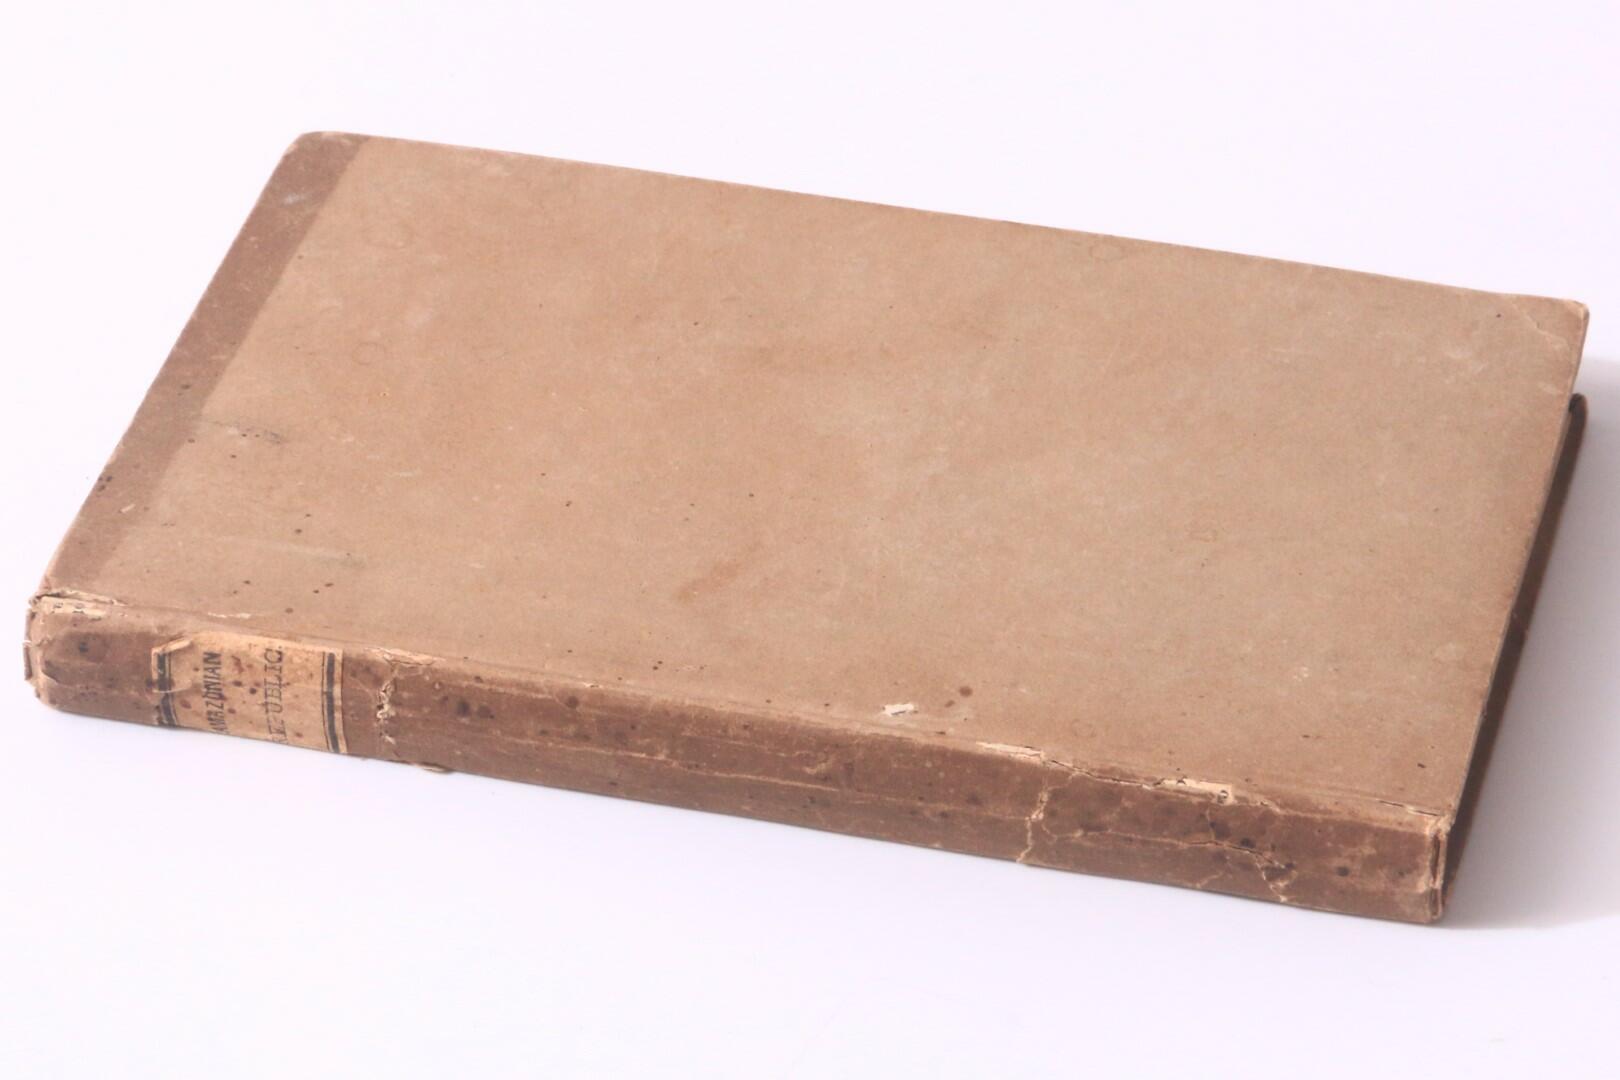 Timothy Savage - The Amazonian Republic, Recently Discovered in the Interior of Peru - Samuel Colman, 1842, First Edition.